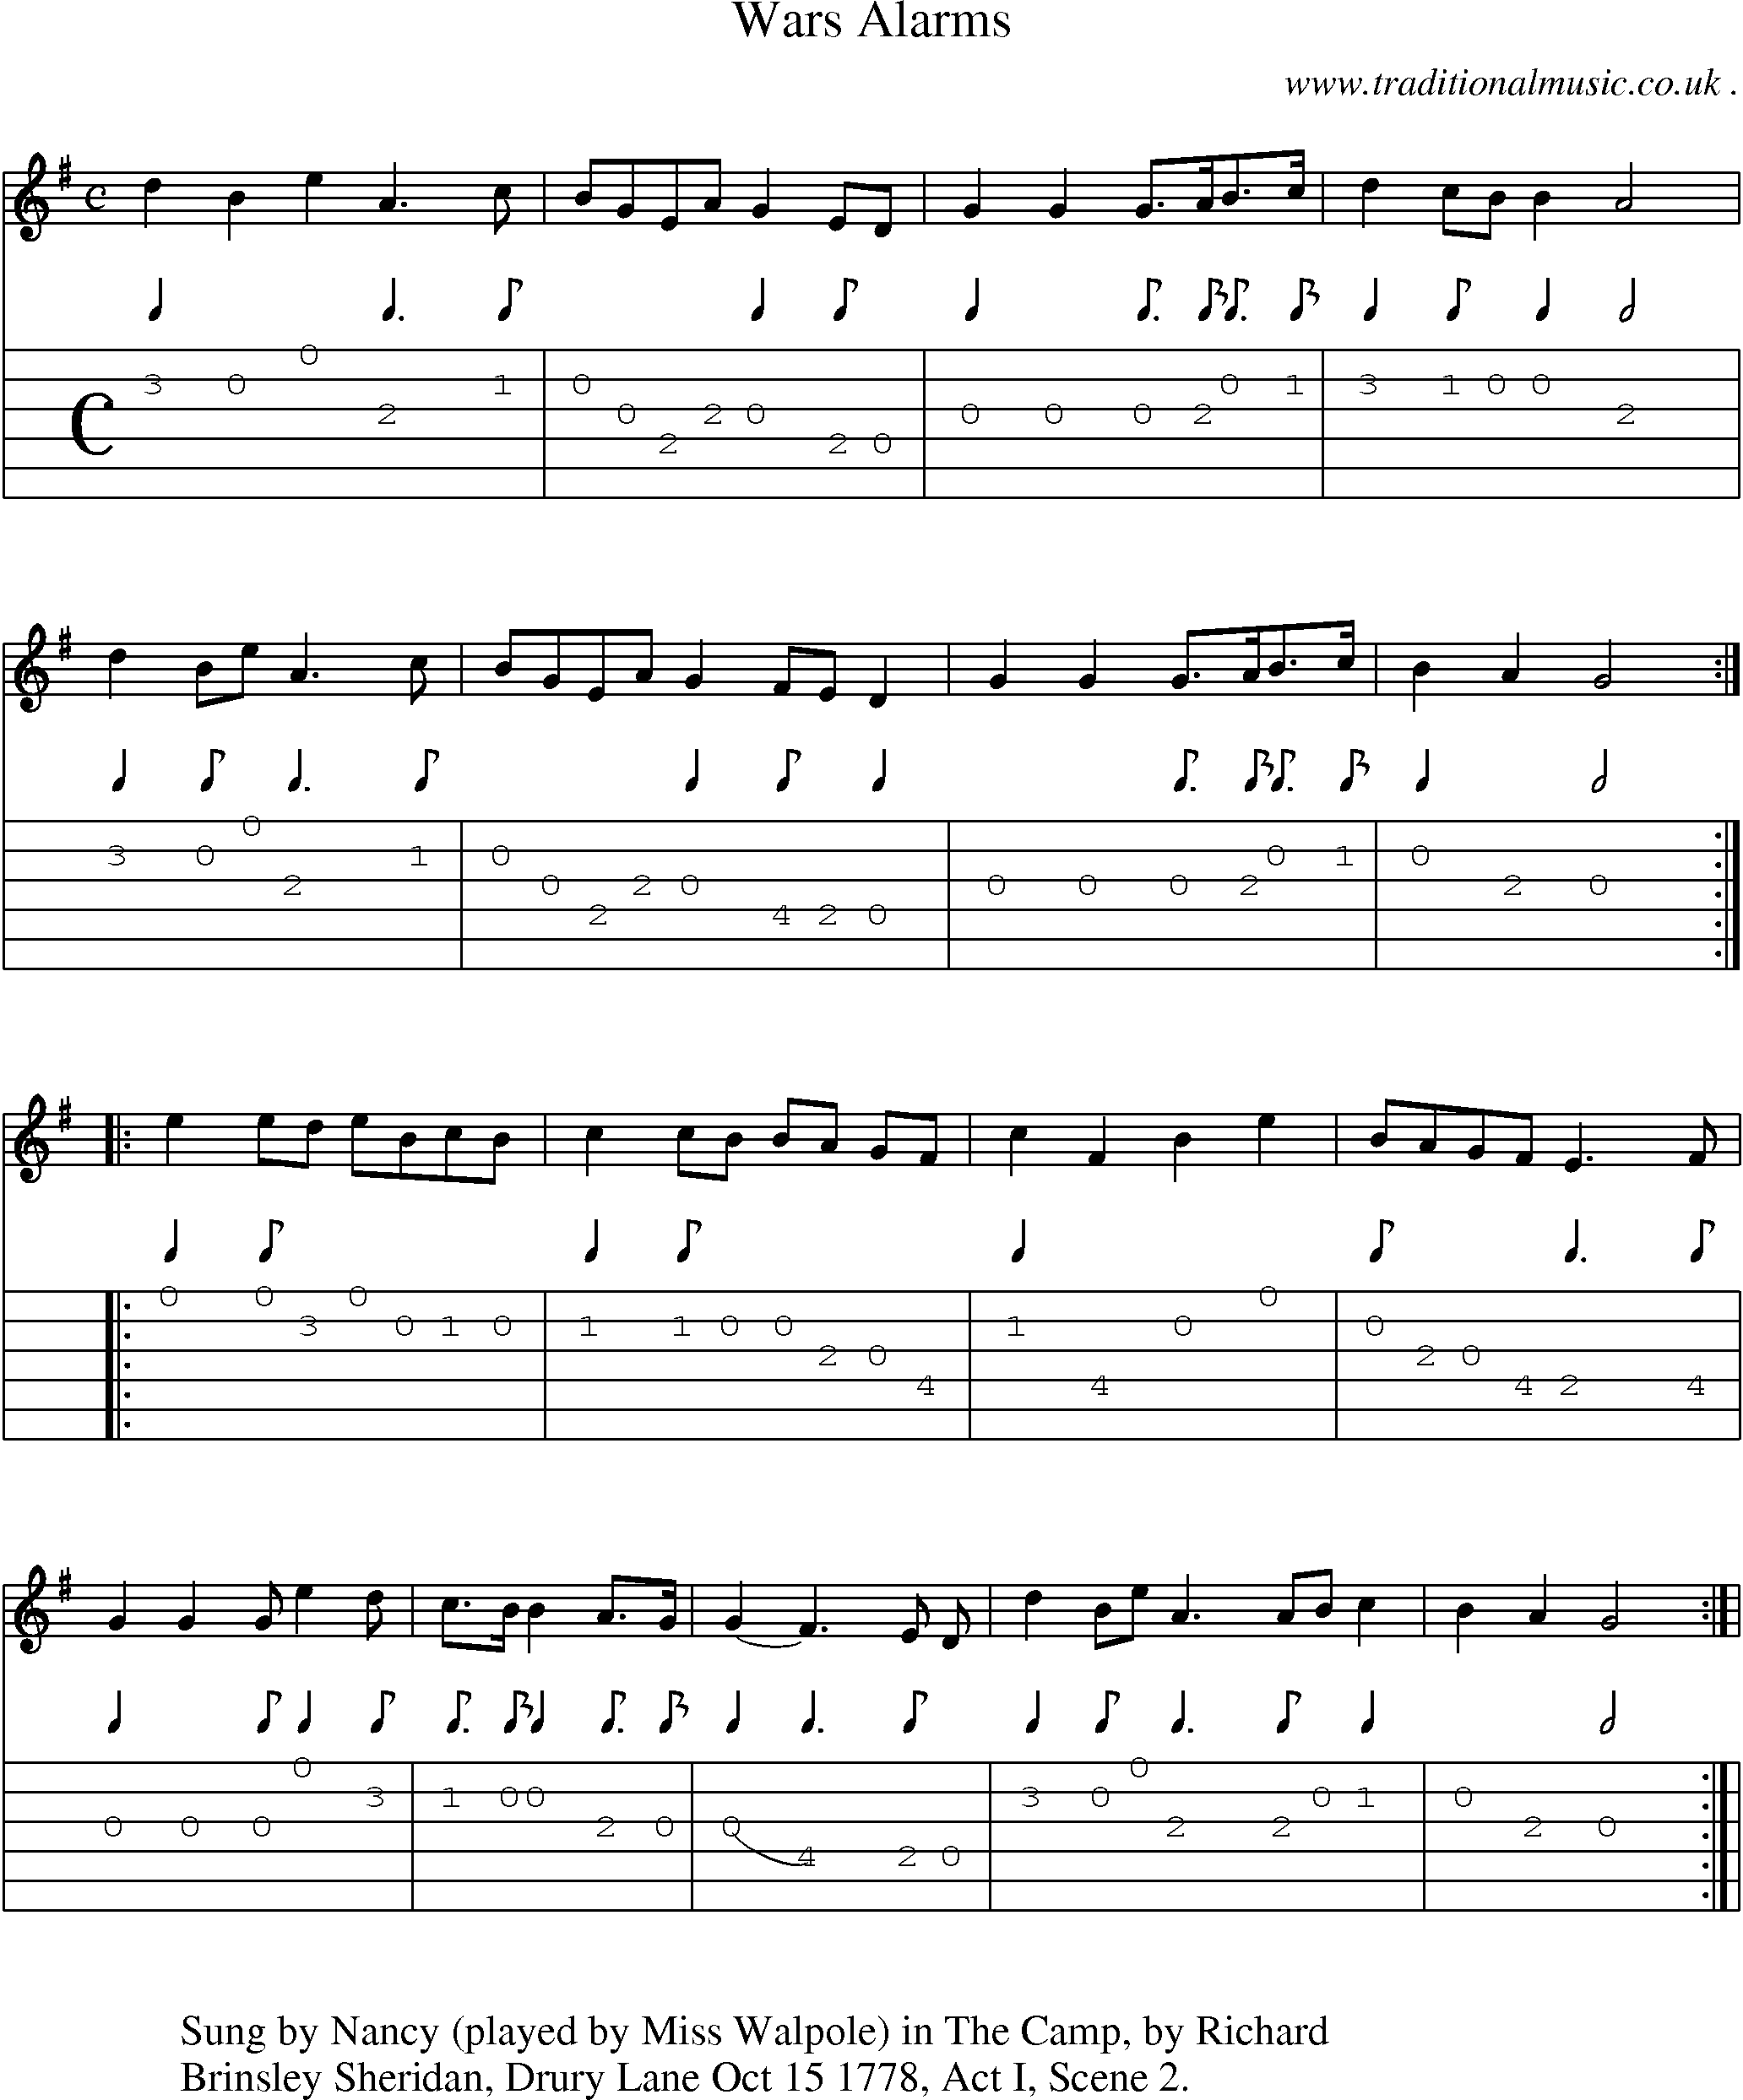 Sheet-Music and Guitar Tabs for Wars Alarms